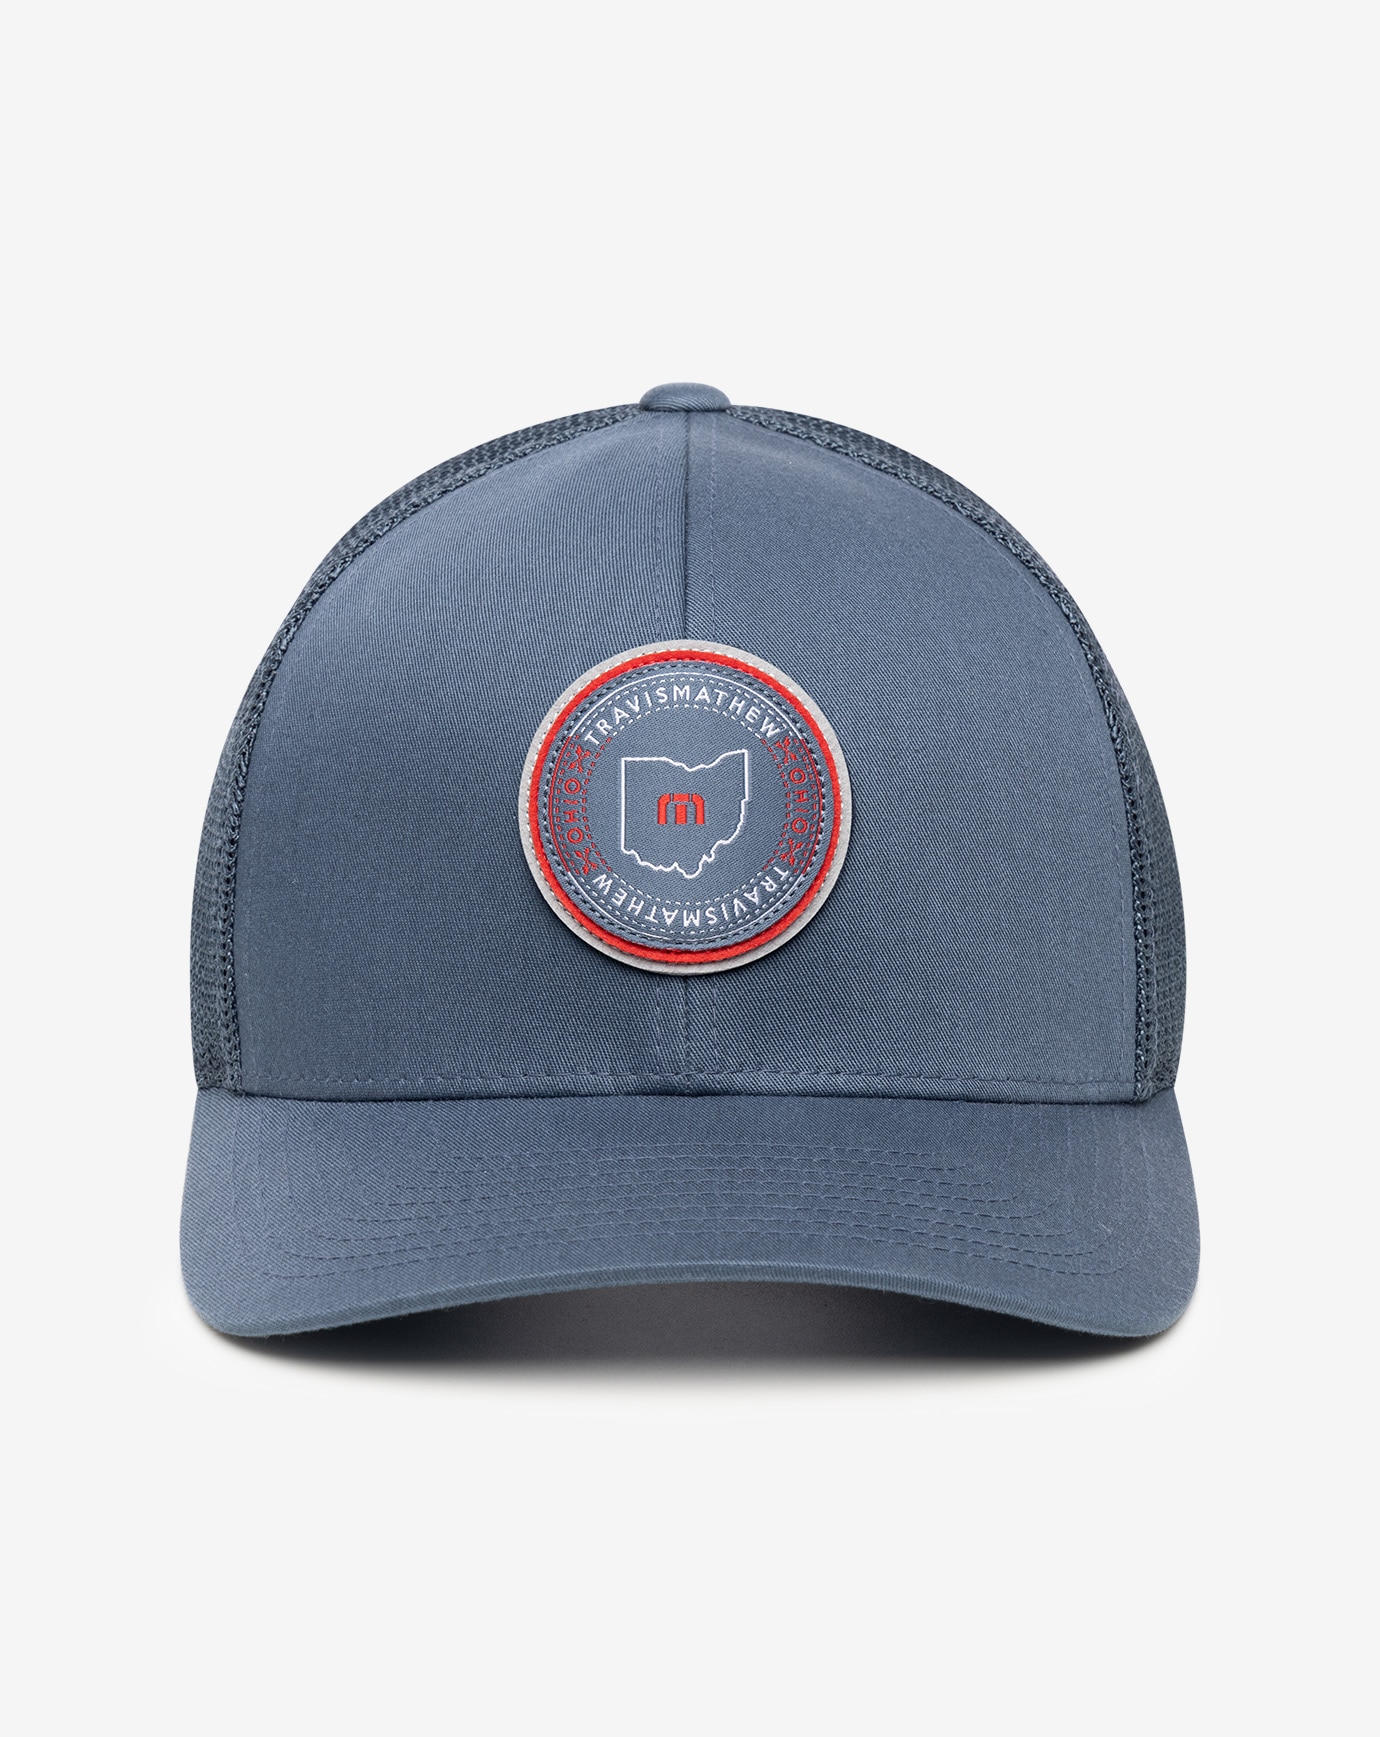 Related Product - HORSE SHOE SNAPBACK HAT